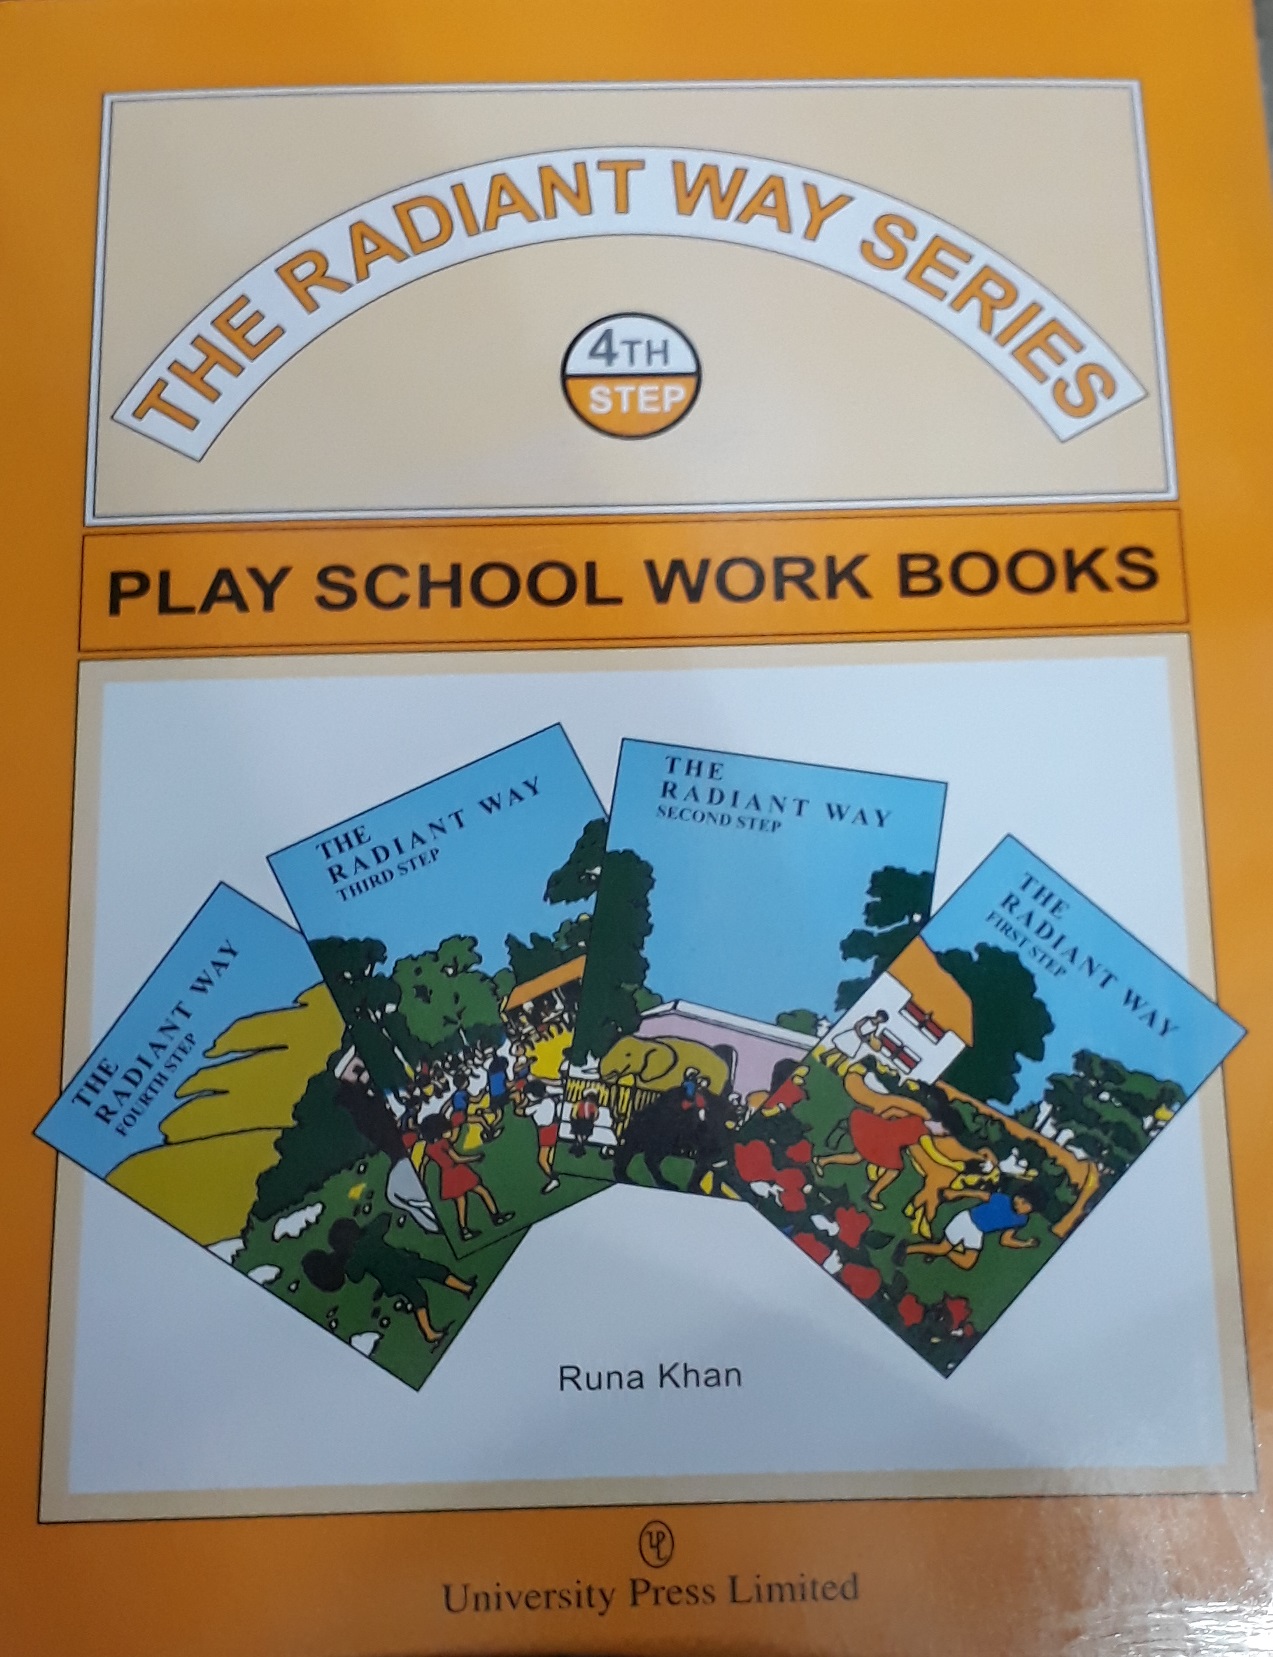 THE RADIANT WAY SERIES FOURTH STEP – PLAY SCHOOL WORK BOOKS